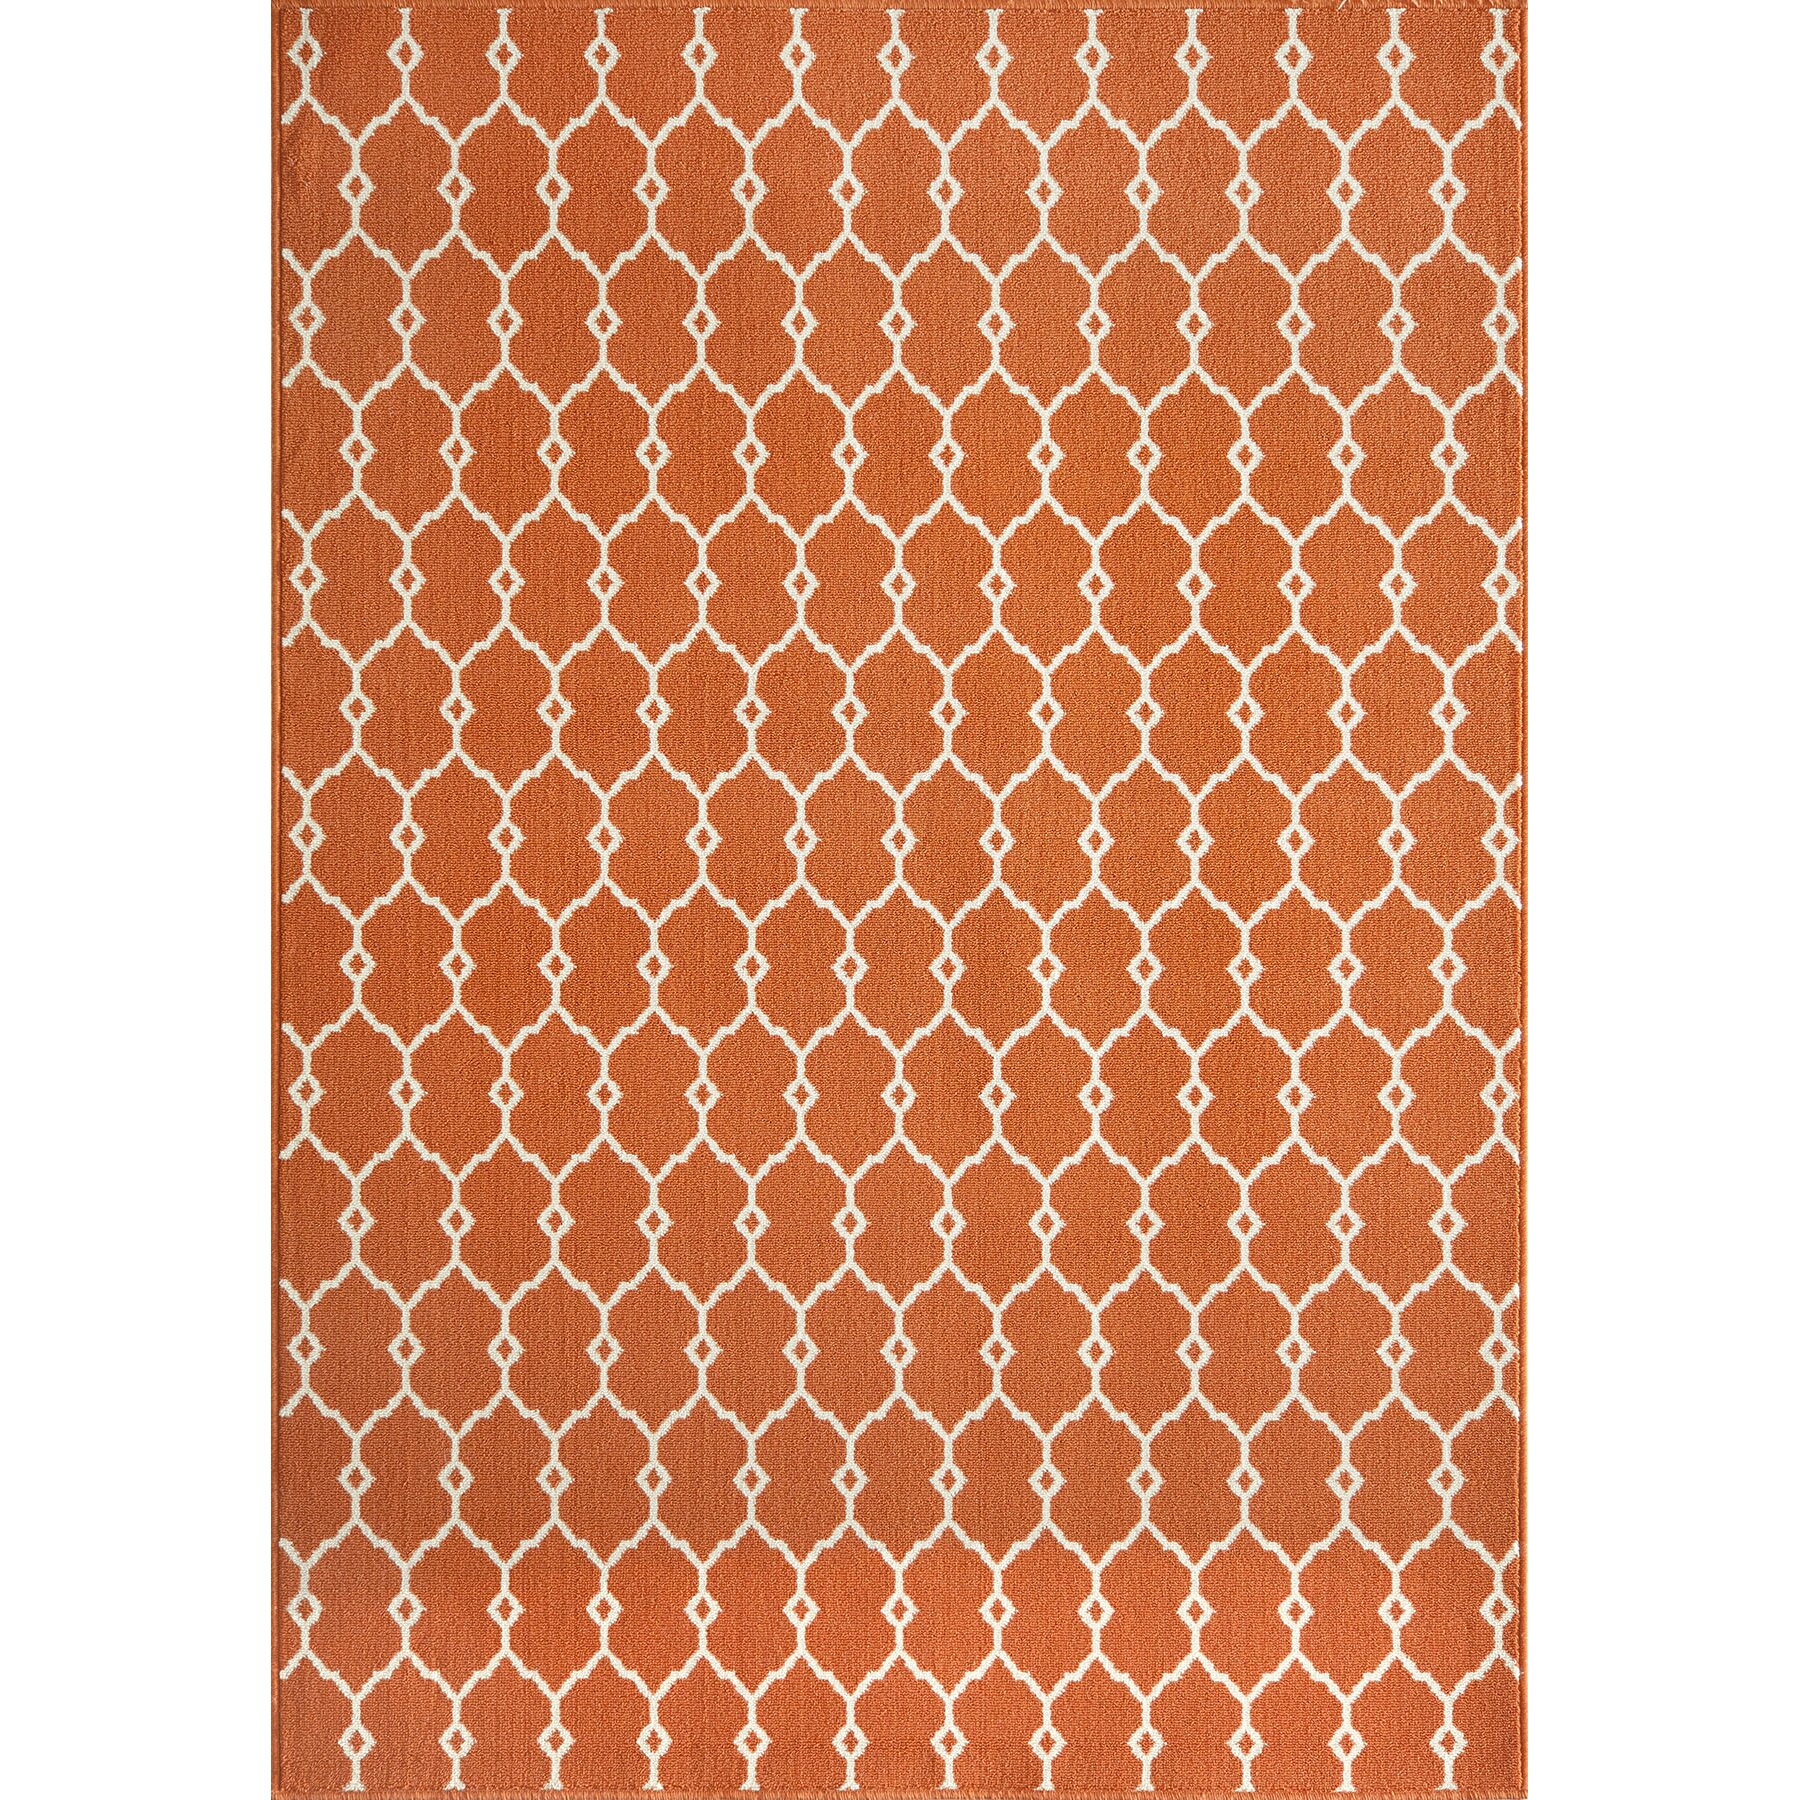 Orange Outdoor Rug - Orange Mojave Indoor Outdoor Rug - Dear Keaton : Pair with pastel blues to give a nod to beautiful sunsets.